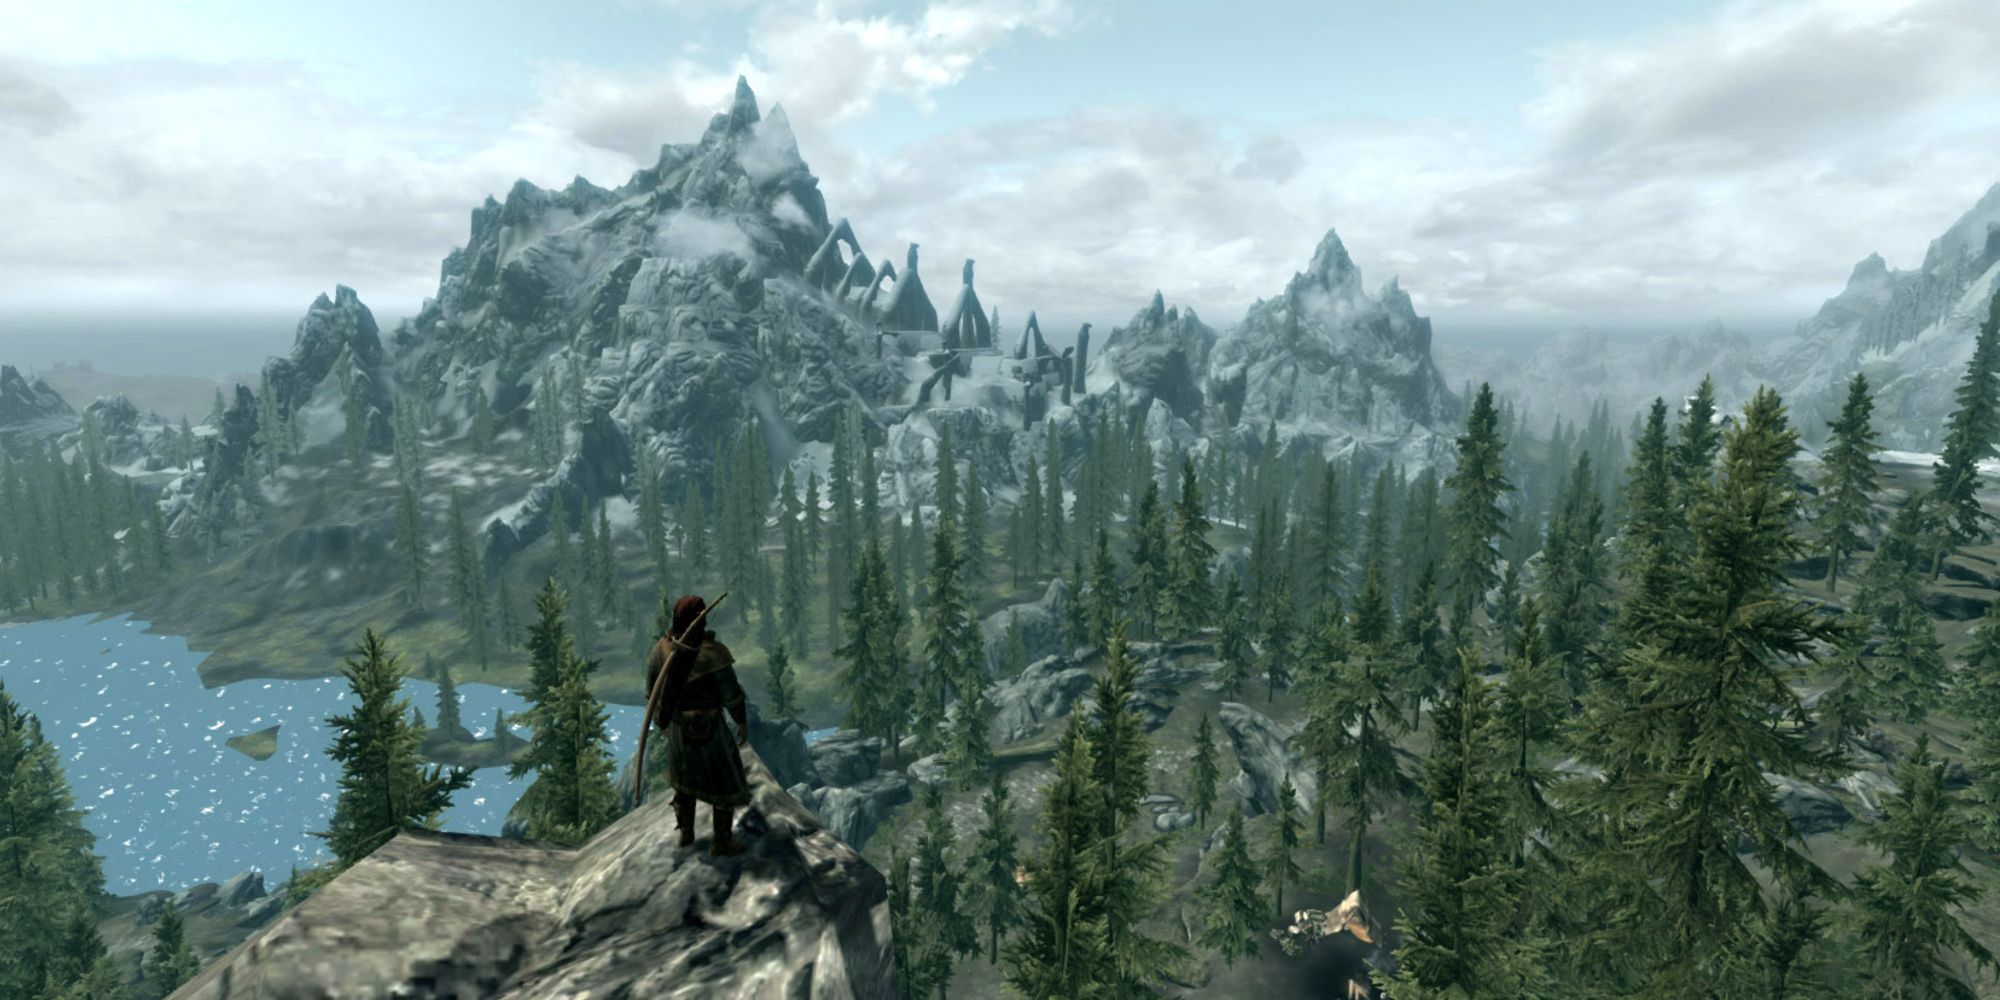 Dragonborn on top of cliff looking out at snowy mountains and Bleak Falls Barrow in the distance in Skyrim